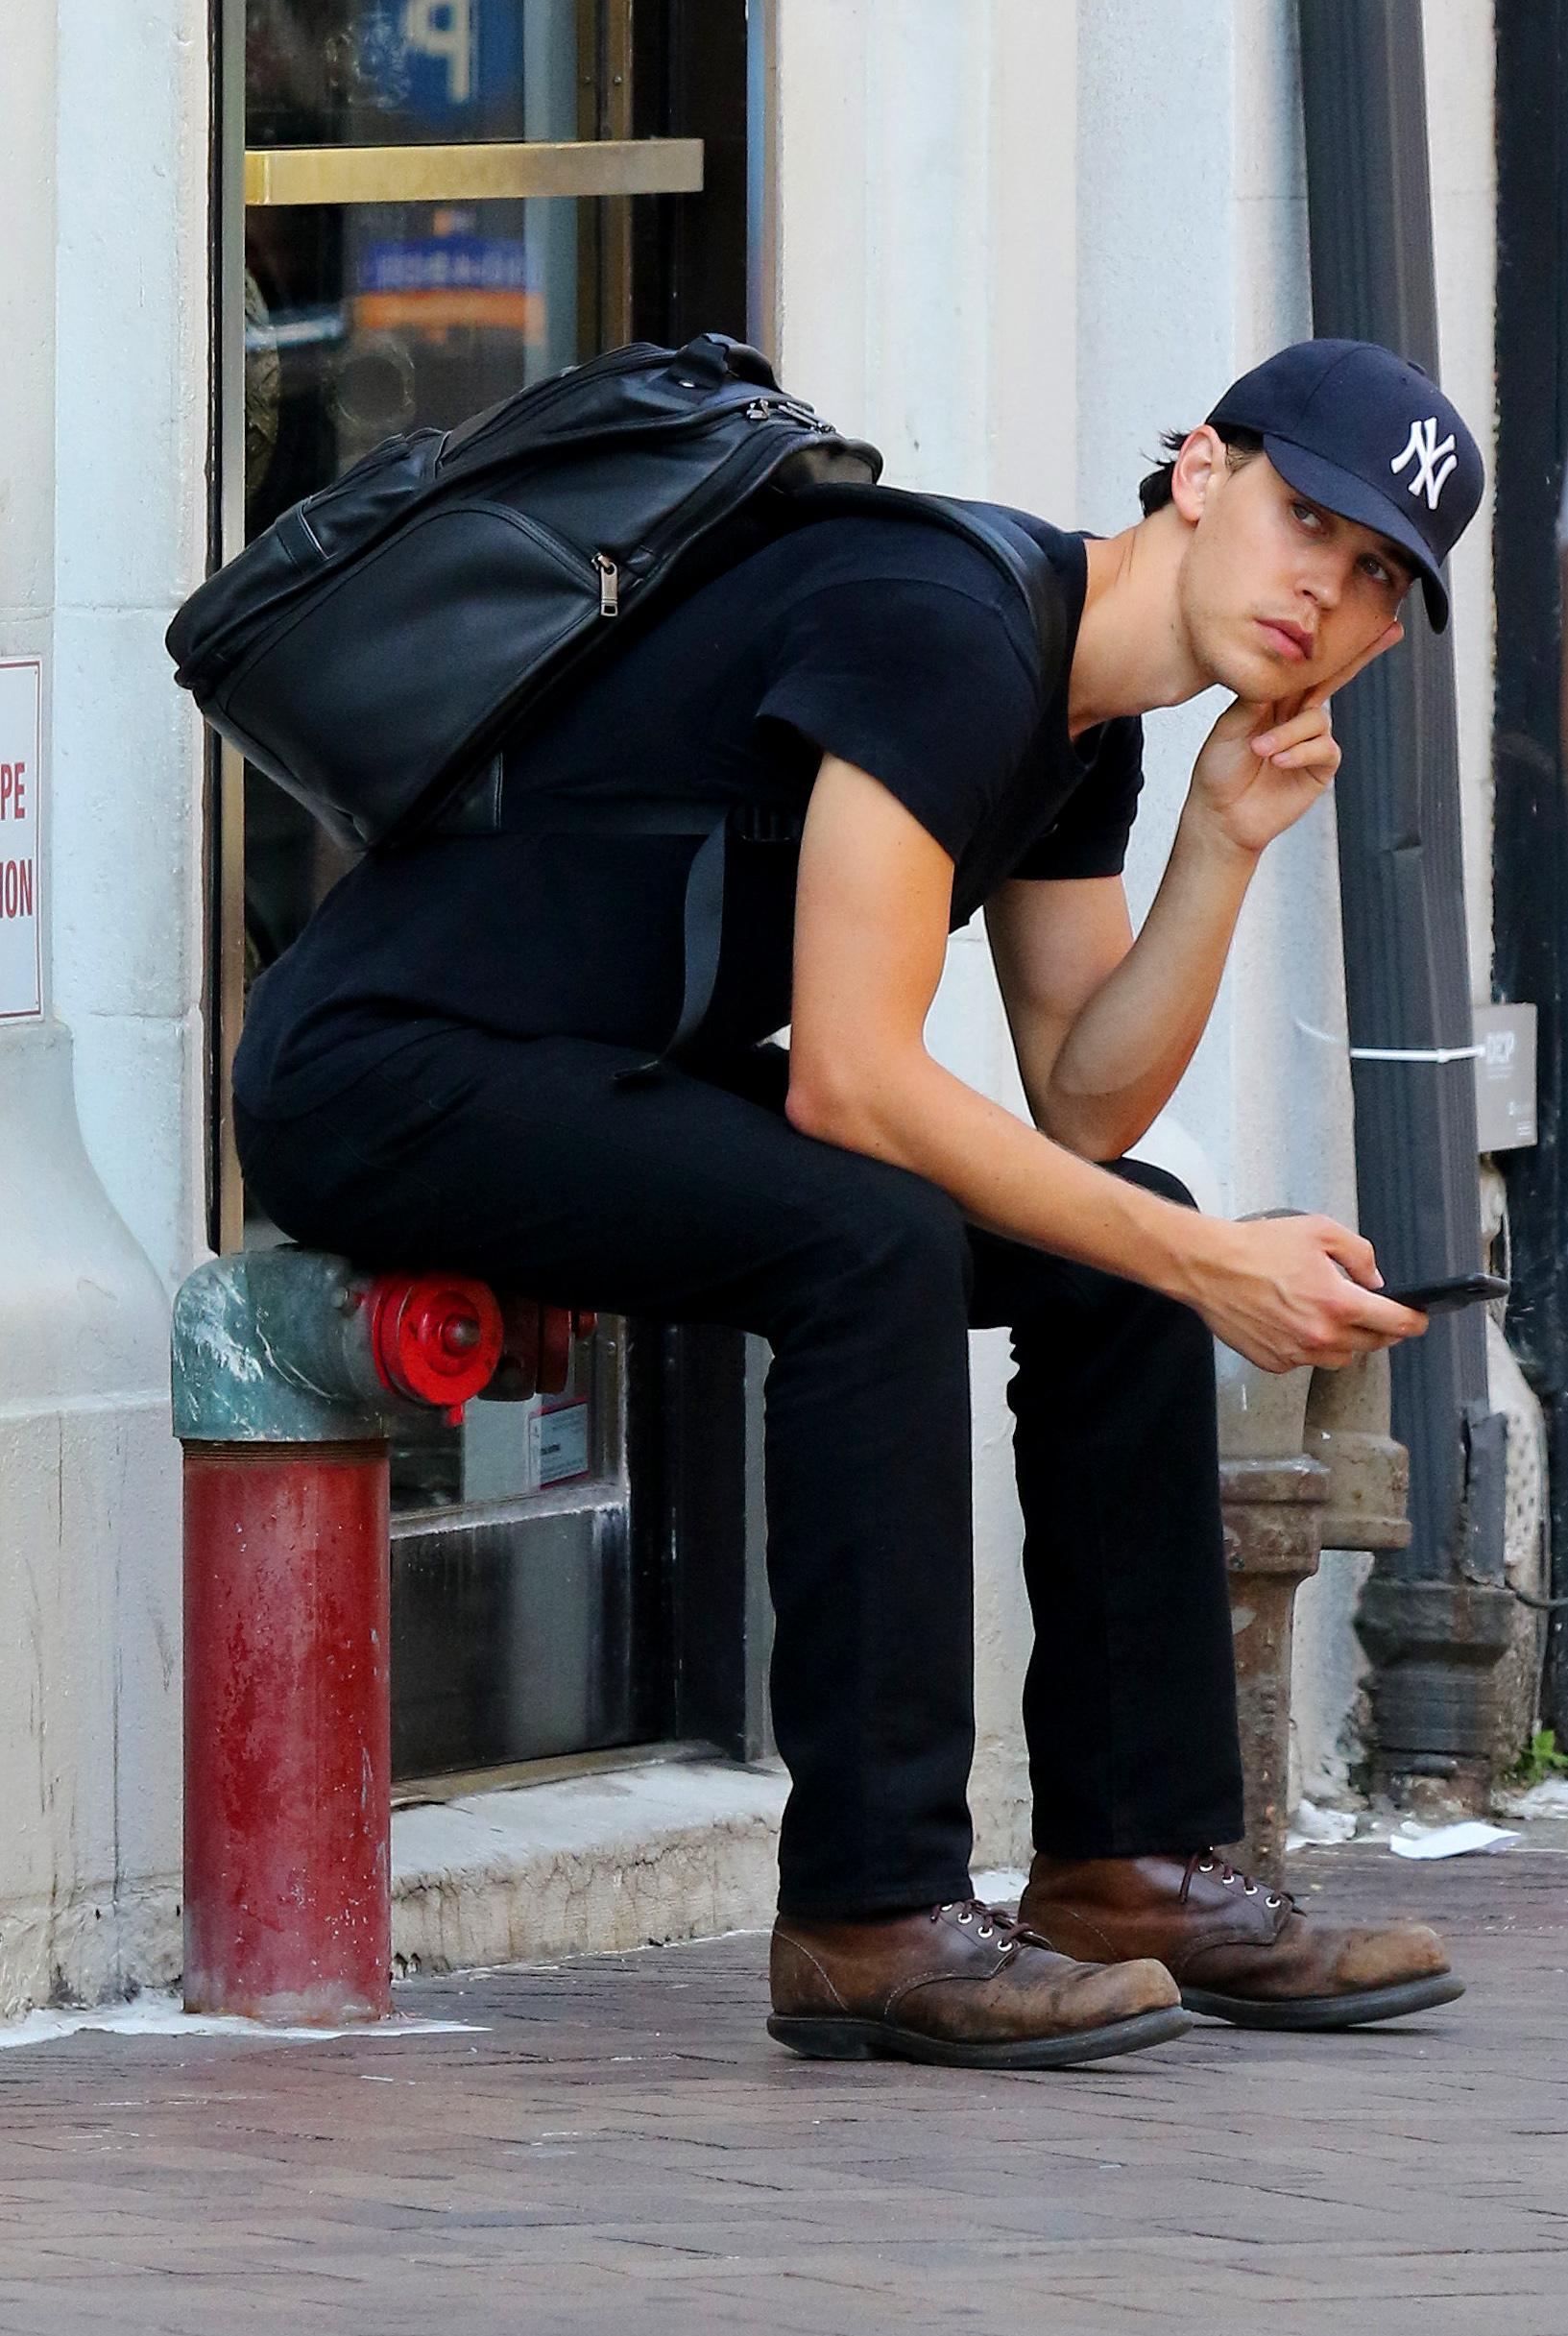 Upcoming quot Elvis Presley quot star Austin Butler looks deep in thought in NYC